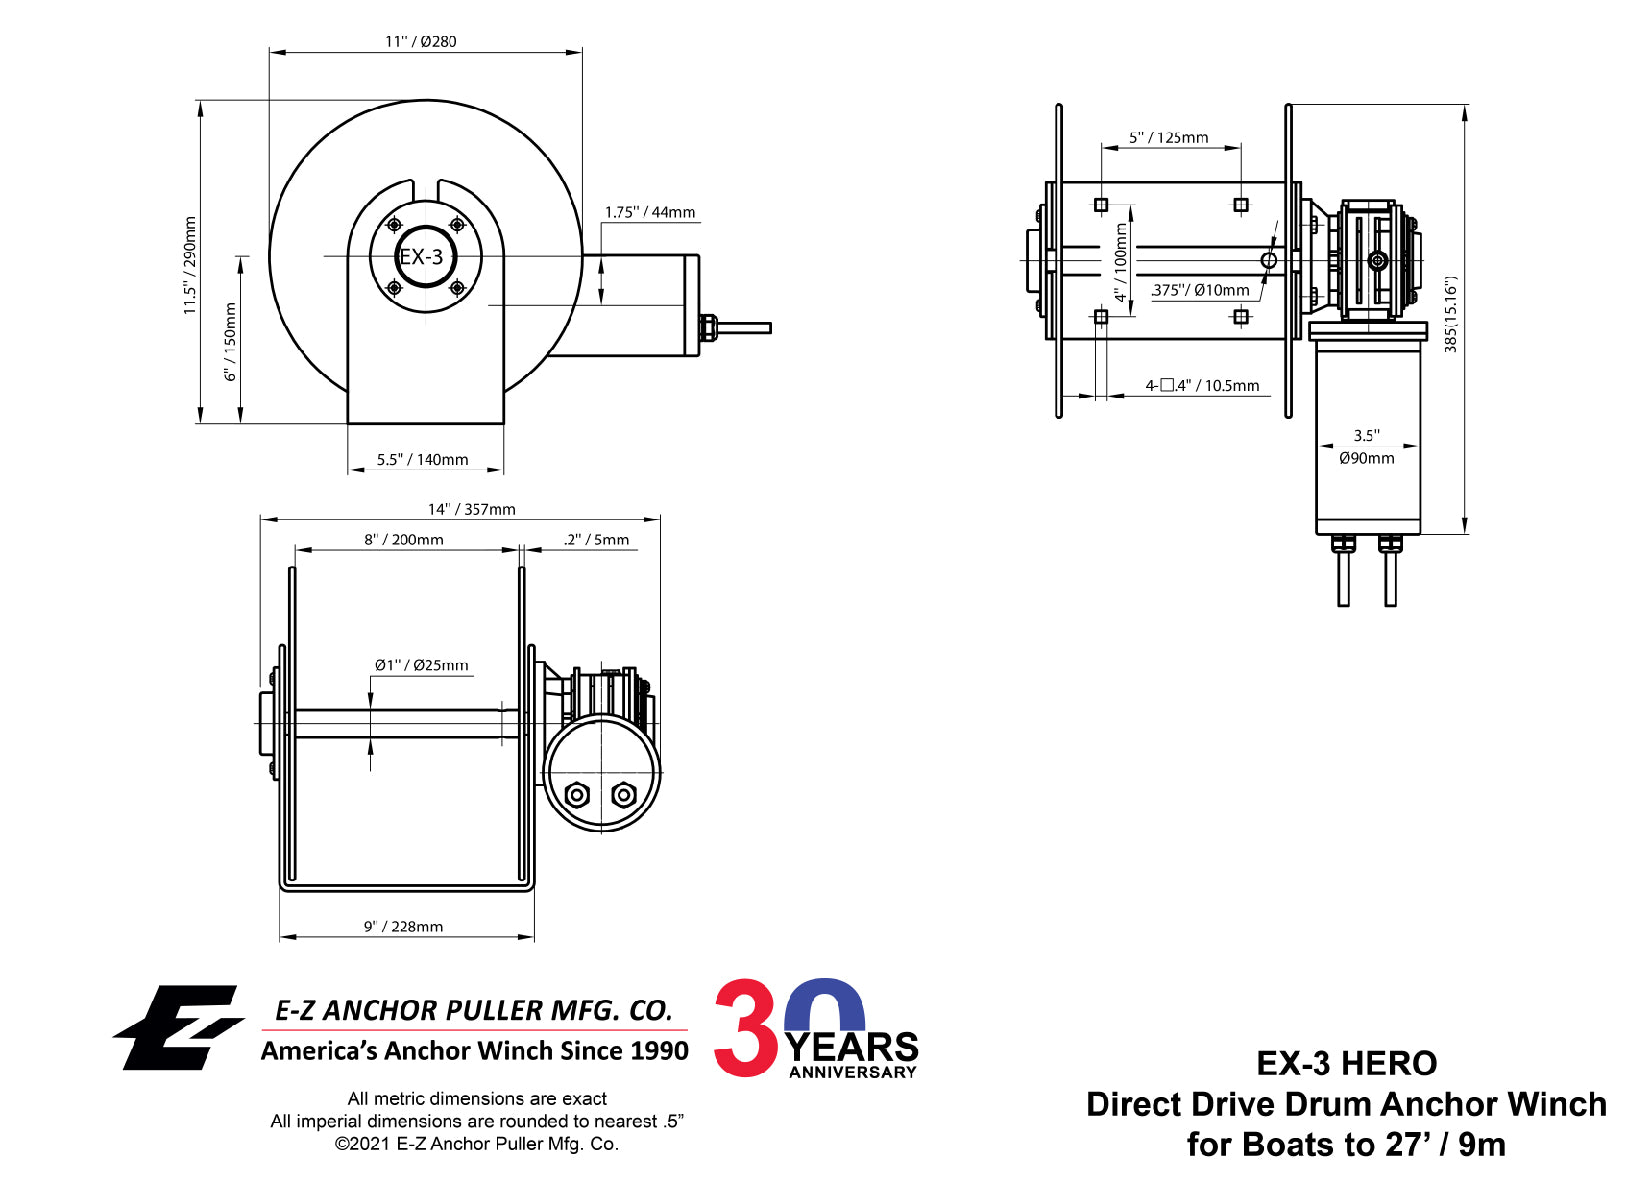 View our specs and drawings for our drum anchor winches